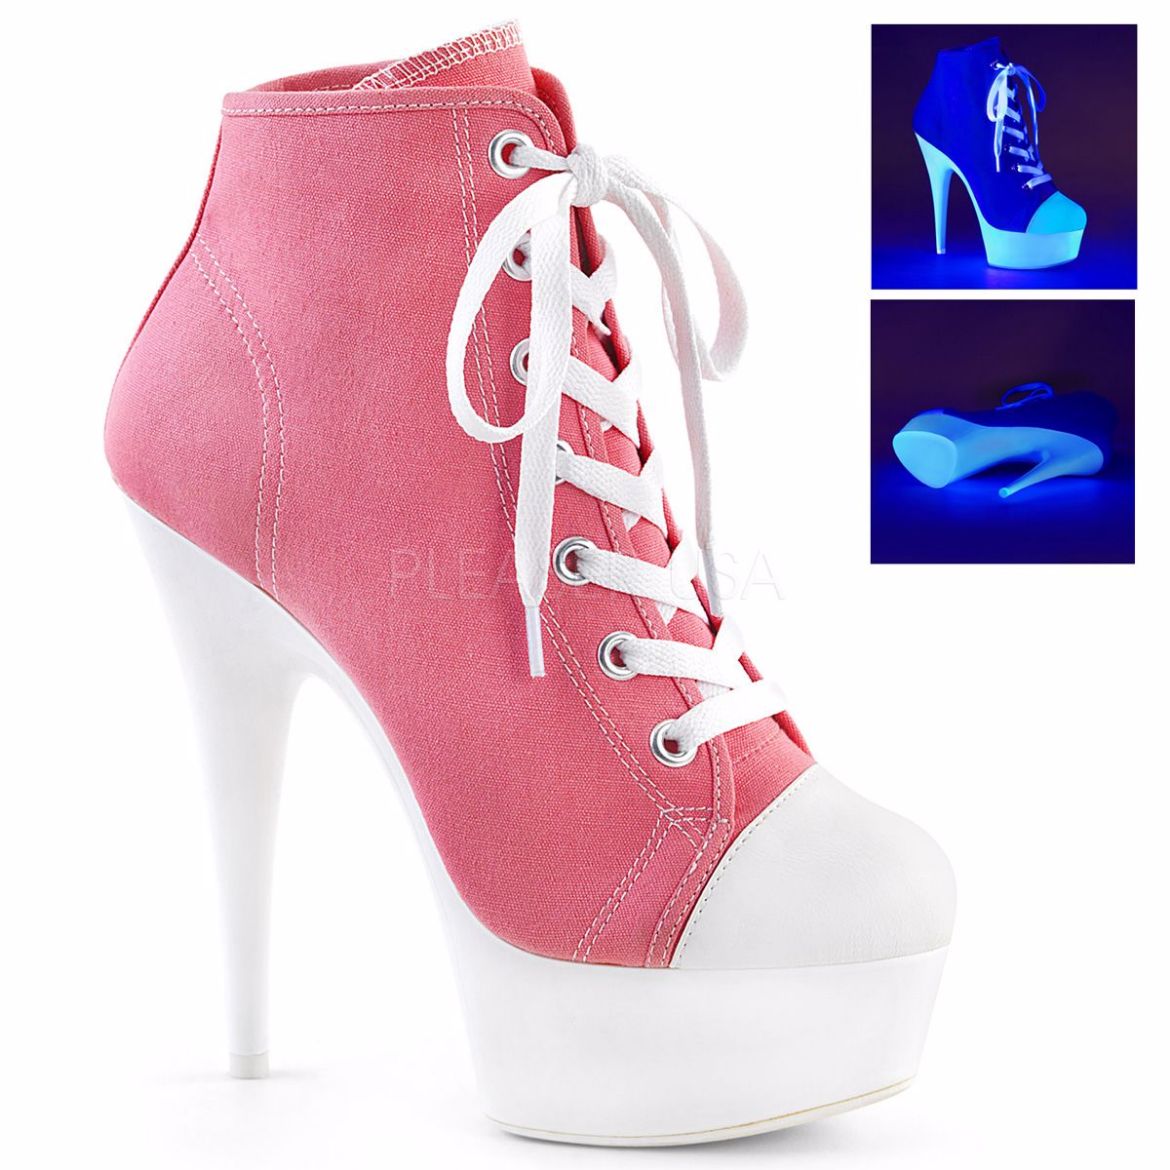 Product image of Pleaser Delight-600Sk-02 Pink Canvas/Neon White, 6 inch (15.2 cm) Heel, 1 3/4 inch (4.4 cm) Platform Ankle Boot